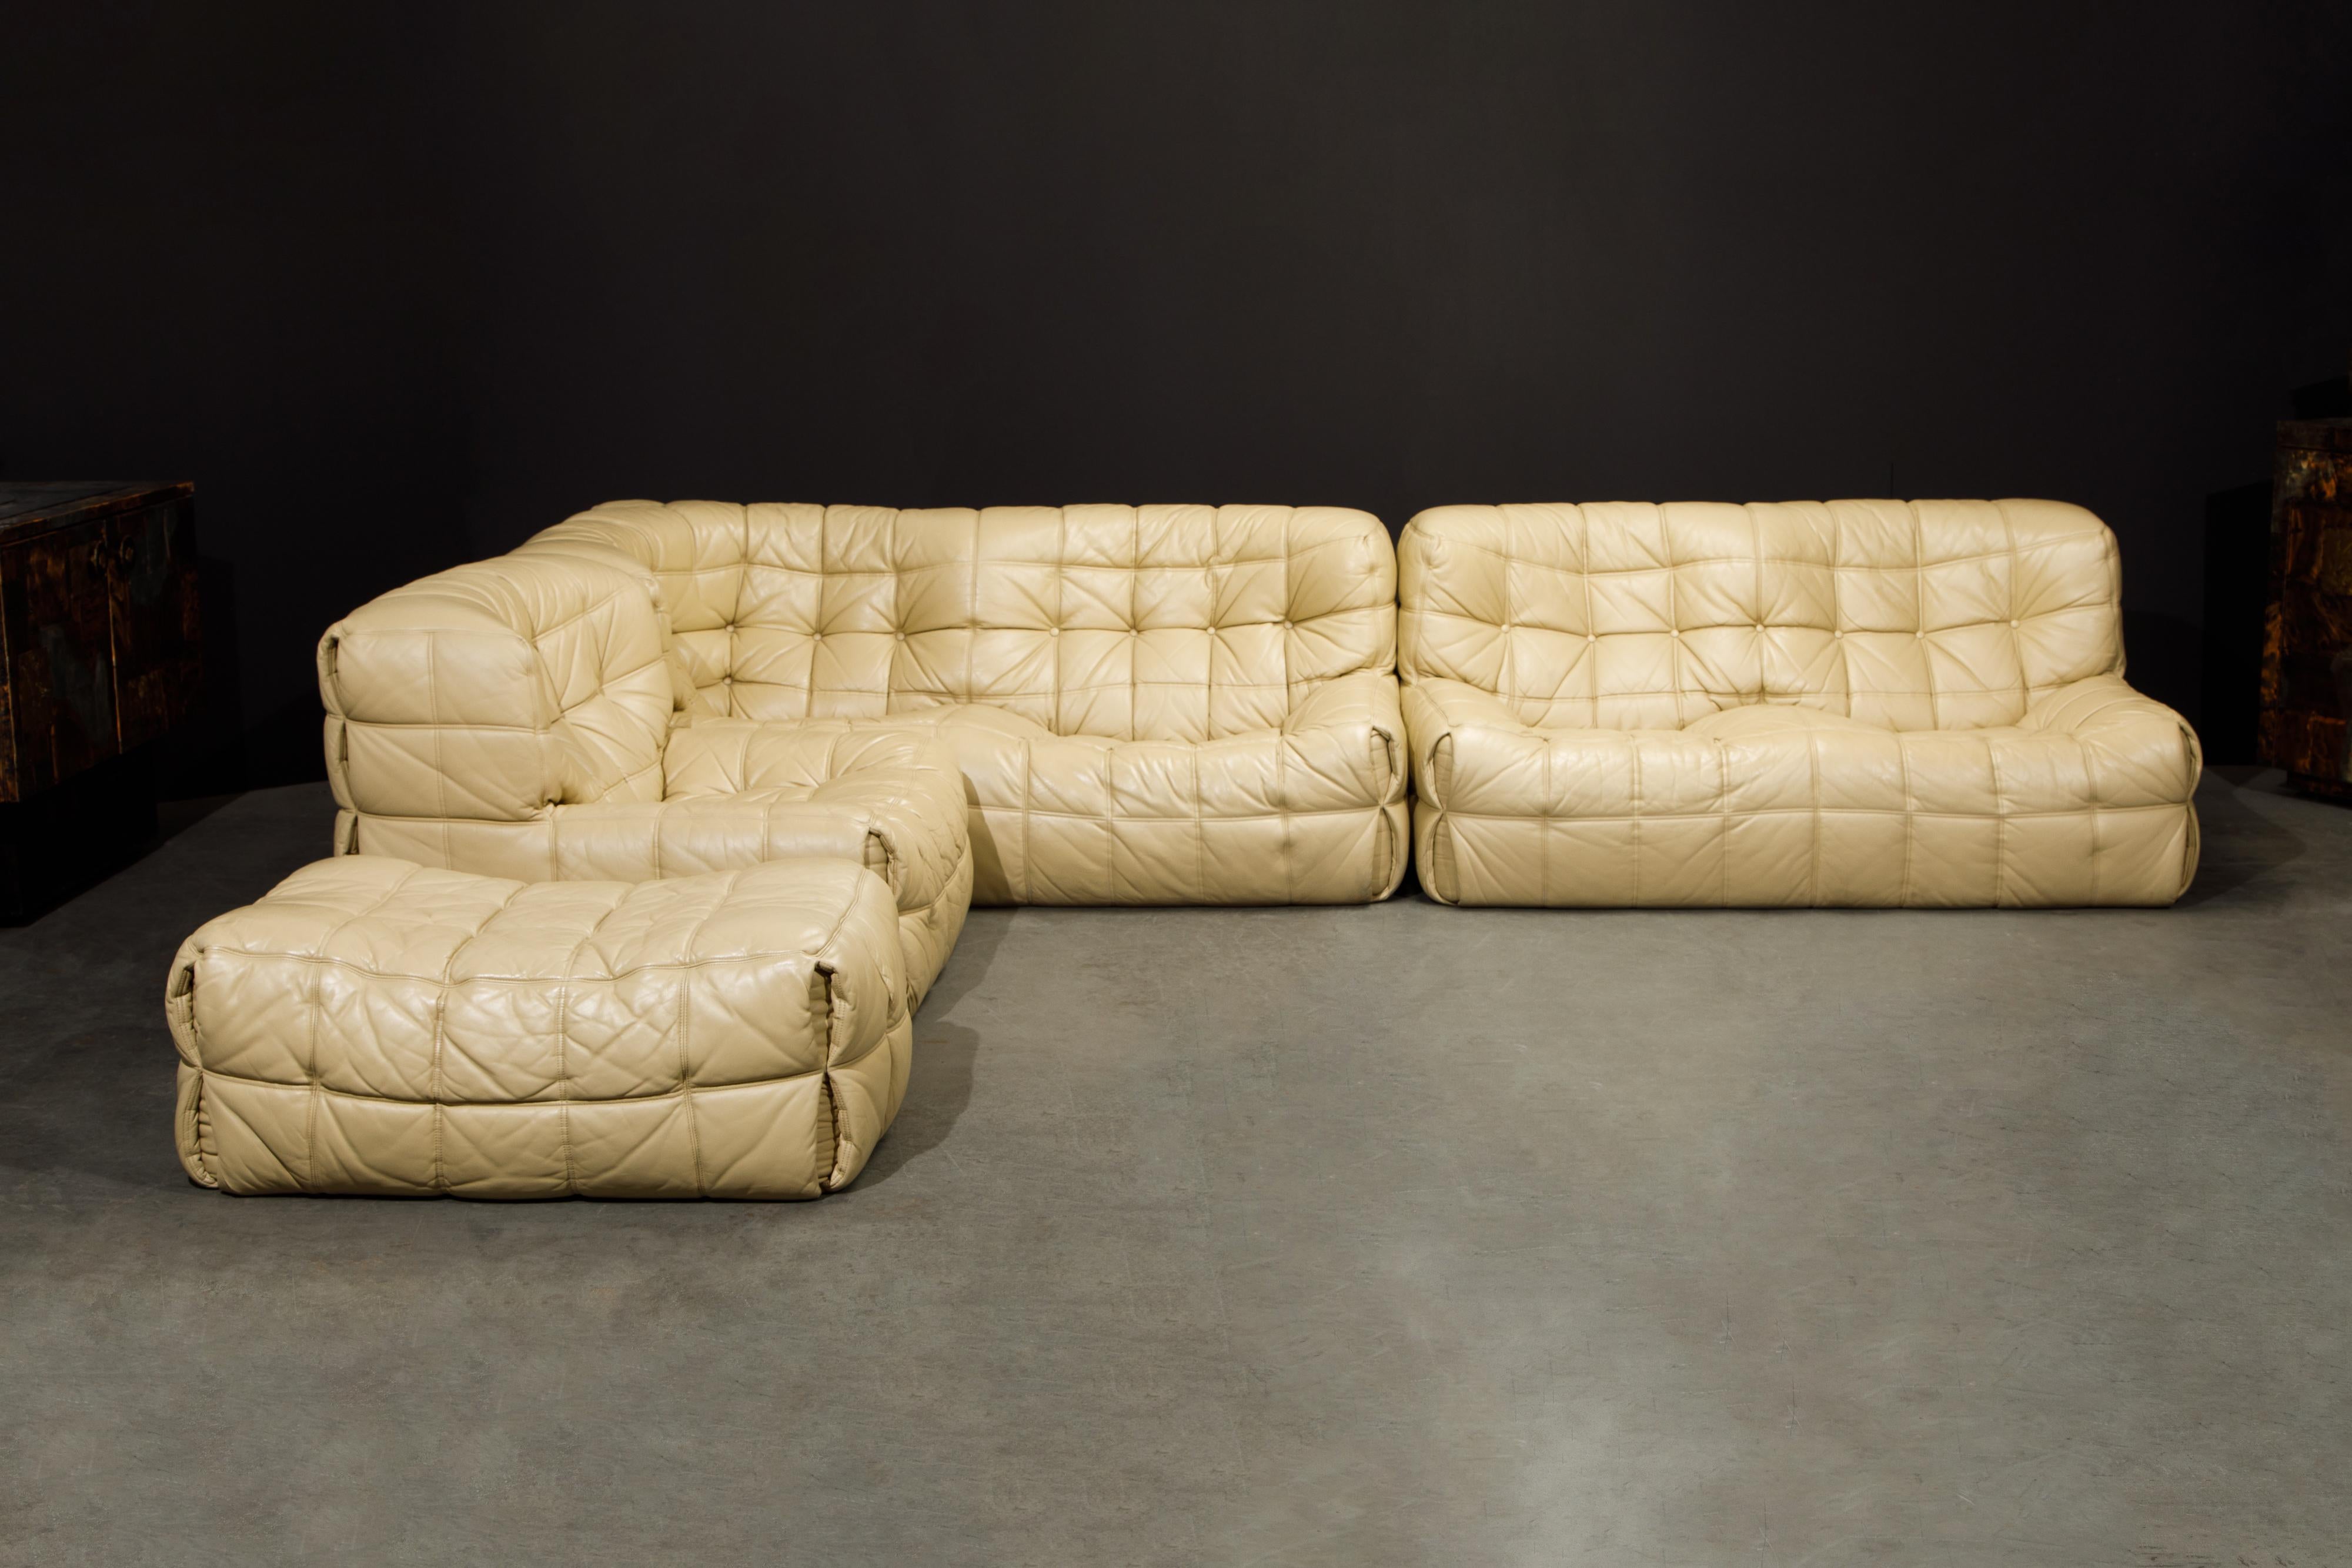 This incredibly rare and sought-after 'Kashima' sectional sofa set by Michel Ducaroy for Ligne Roset, France, was designed in 1976. Upholstered in soft and sumptuous tan colored leather, this living room set is comprised of a lounge chair and